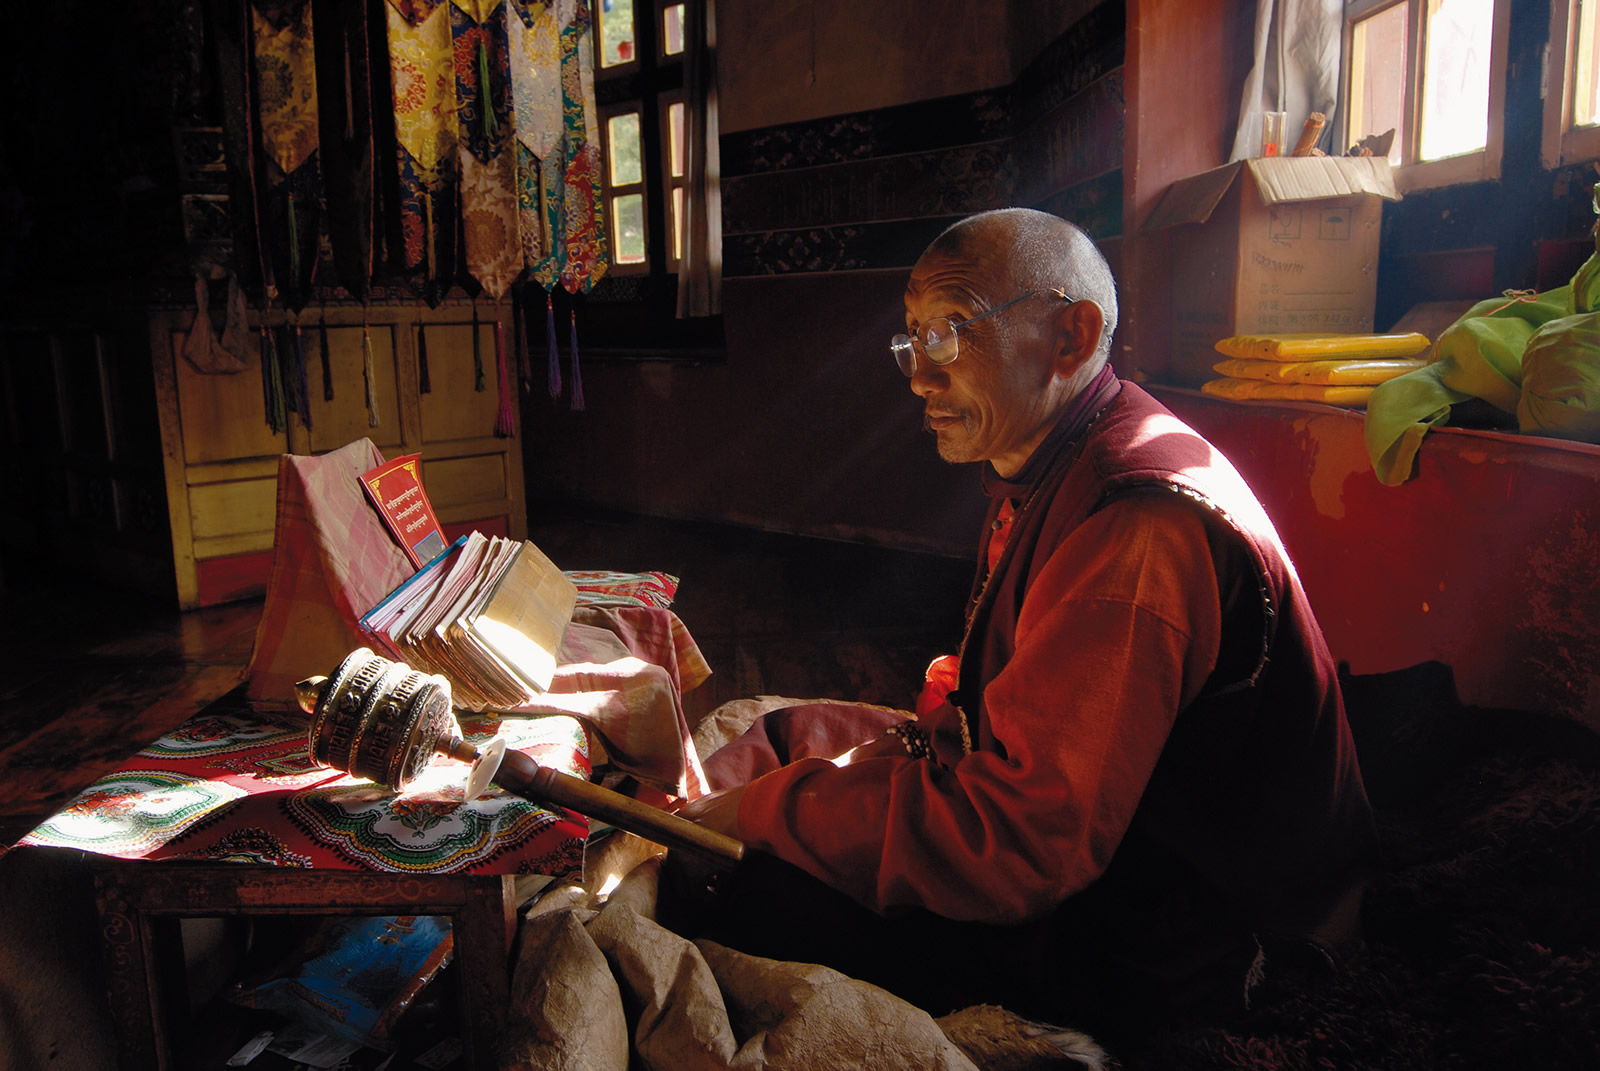 Buddhist Meditation Traditions in Tibet: The Union of Three